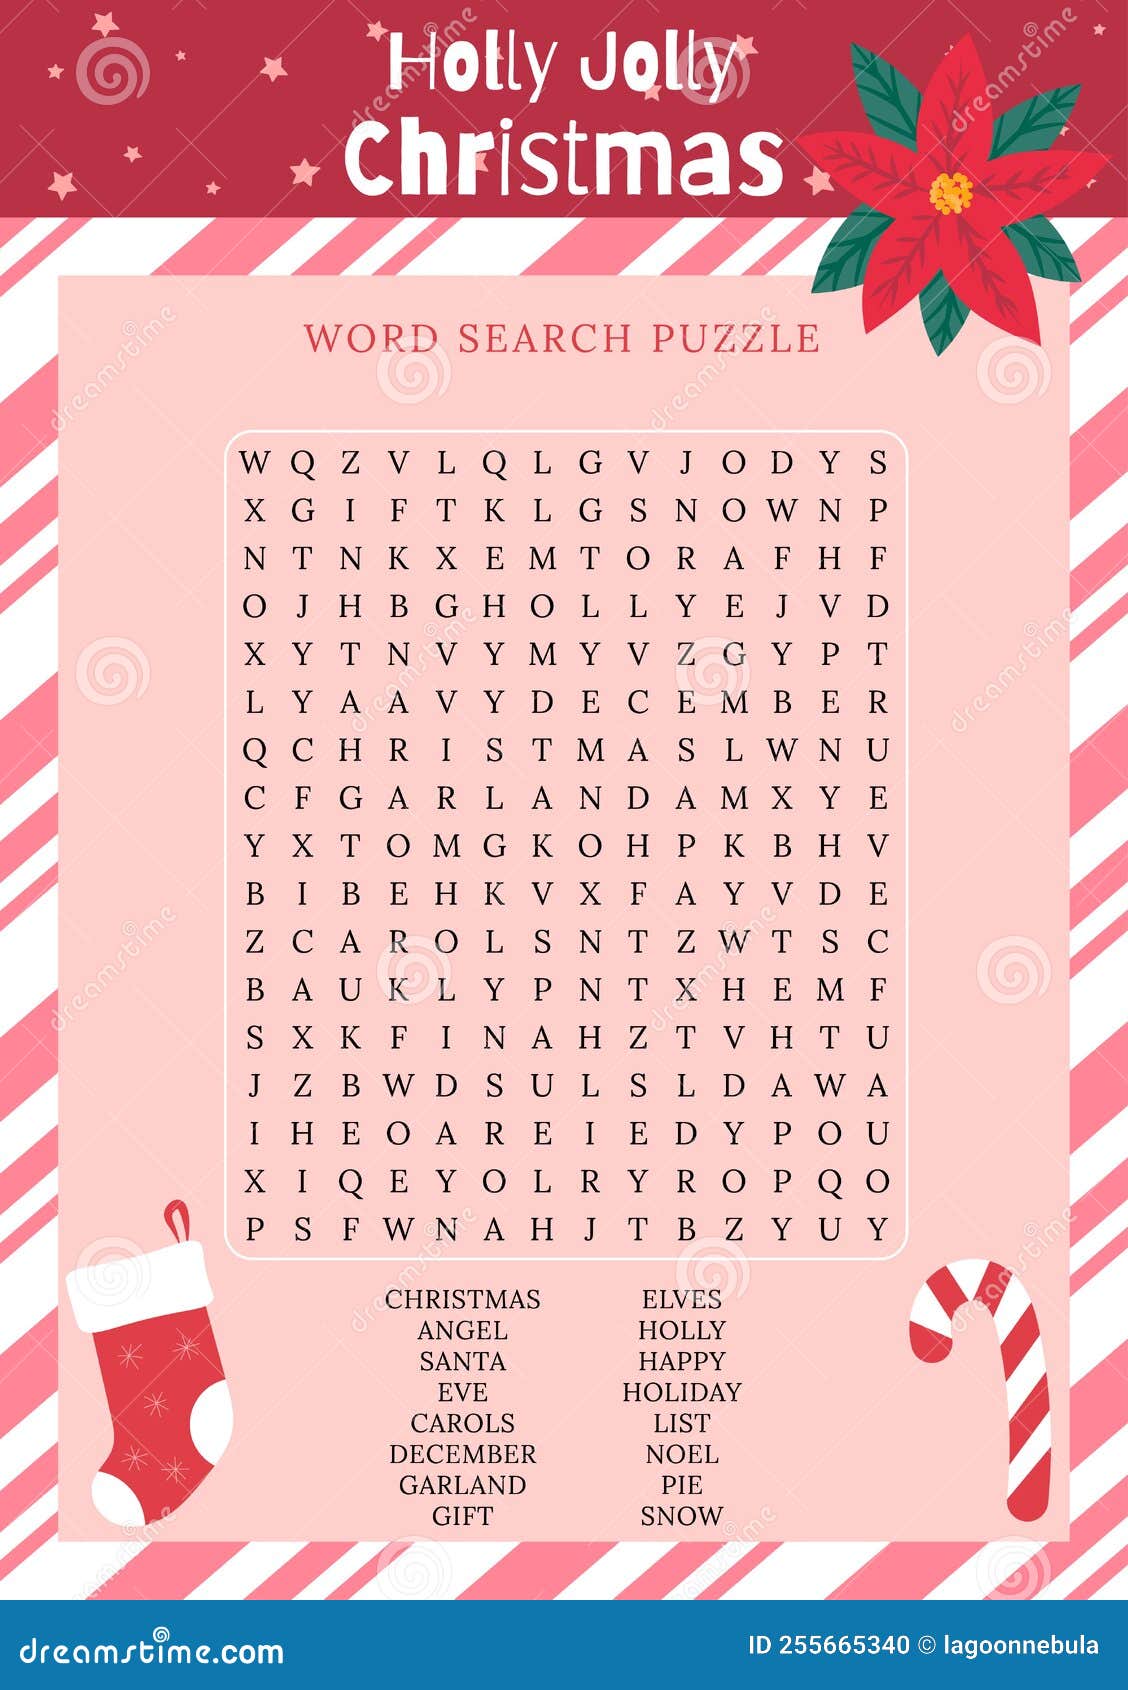 holly-jolly-christmas-word-search-puzzle-game-about-winter-holidays-party-card-stock-vector